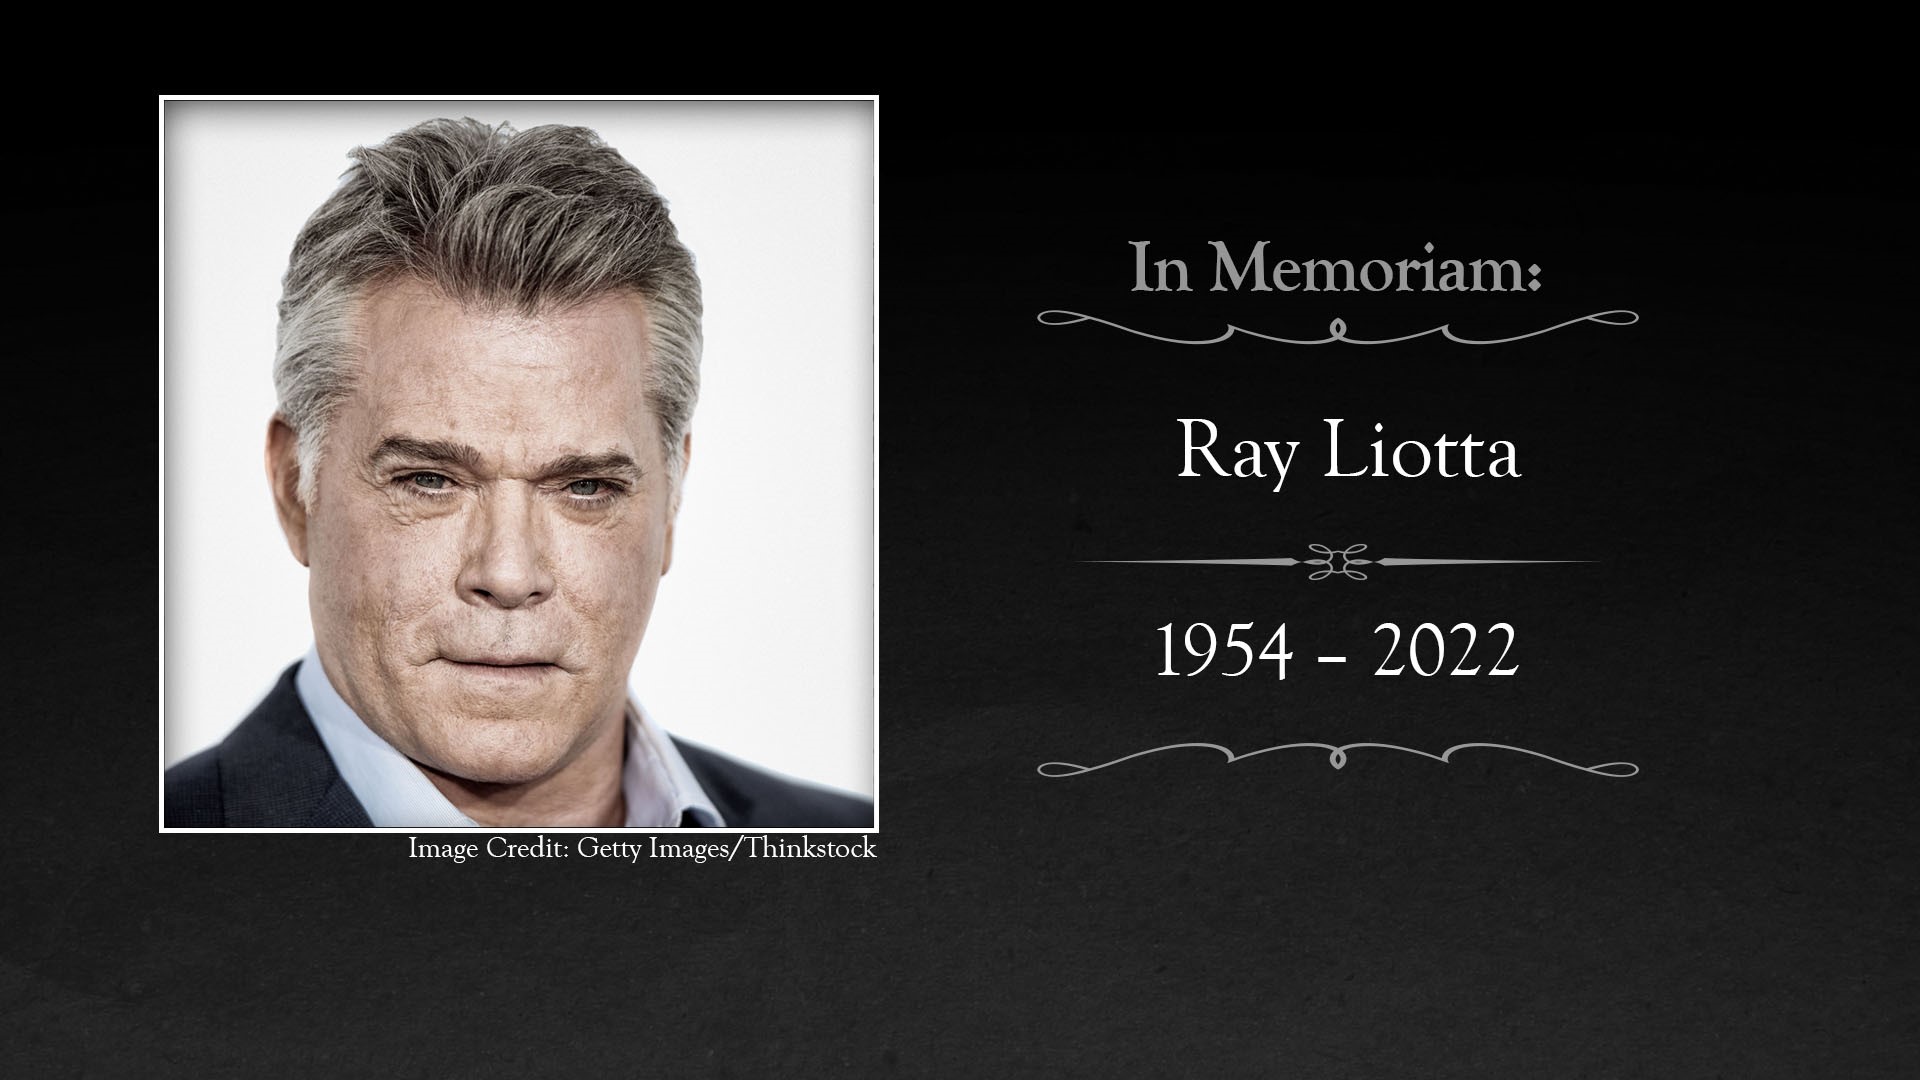 Ray Liotta, Goodfellas and Field of Dreams star, dies at 67 | king5.com